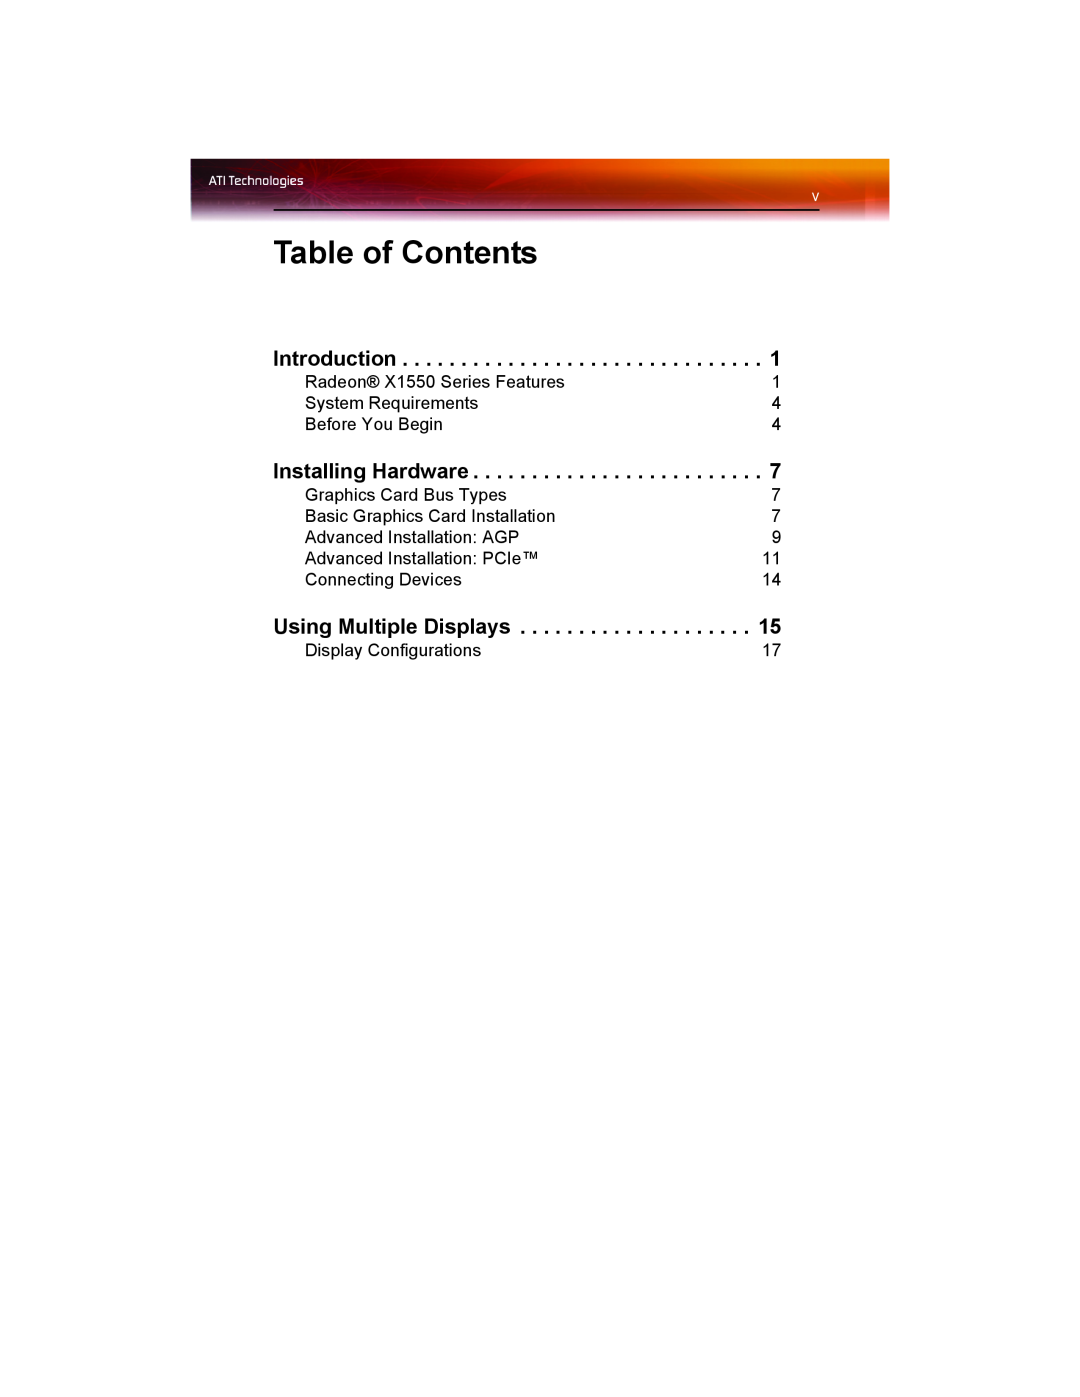 ATI Technologies X1550 SERIES manual Table of Contents, Introduction, Installing Hardware, Using Multiple Displays 